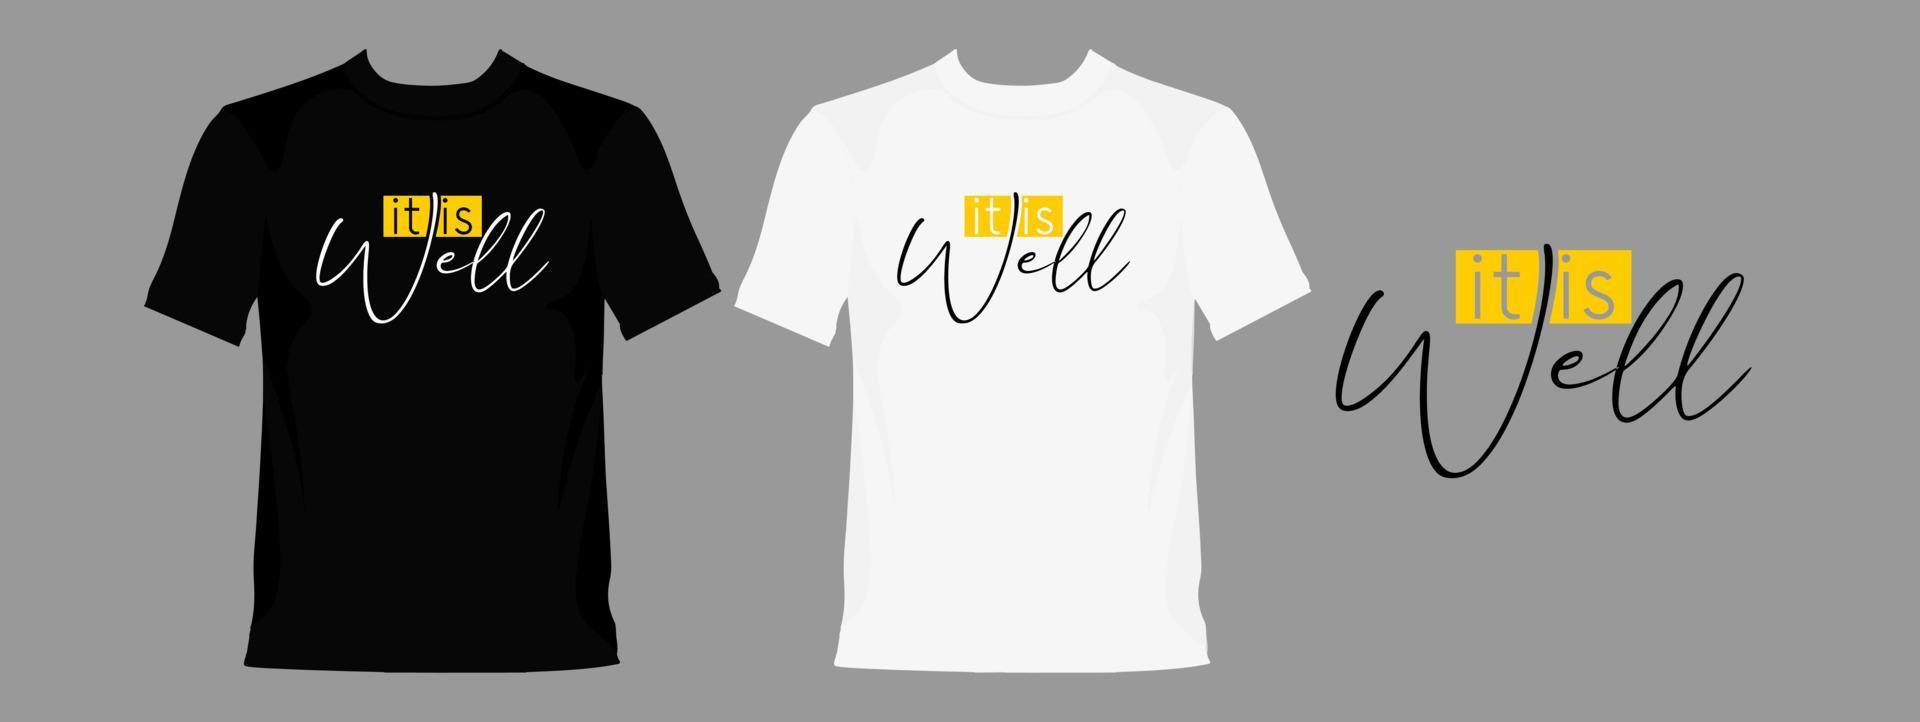 it is well typography graphic design, for t-shirt prints, vector illustration